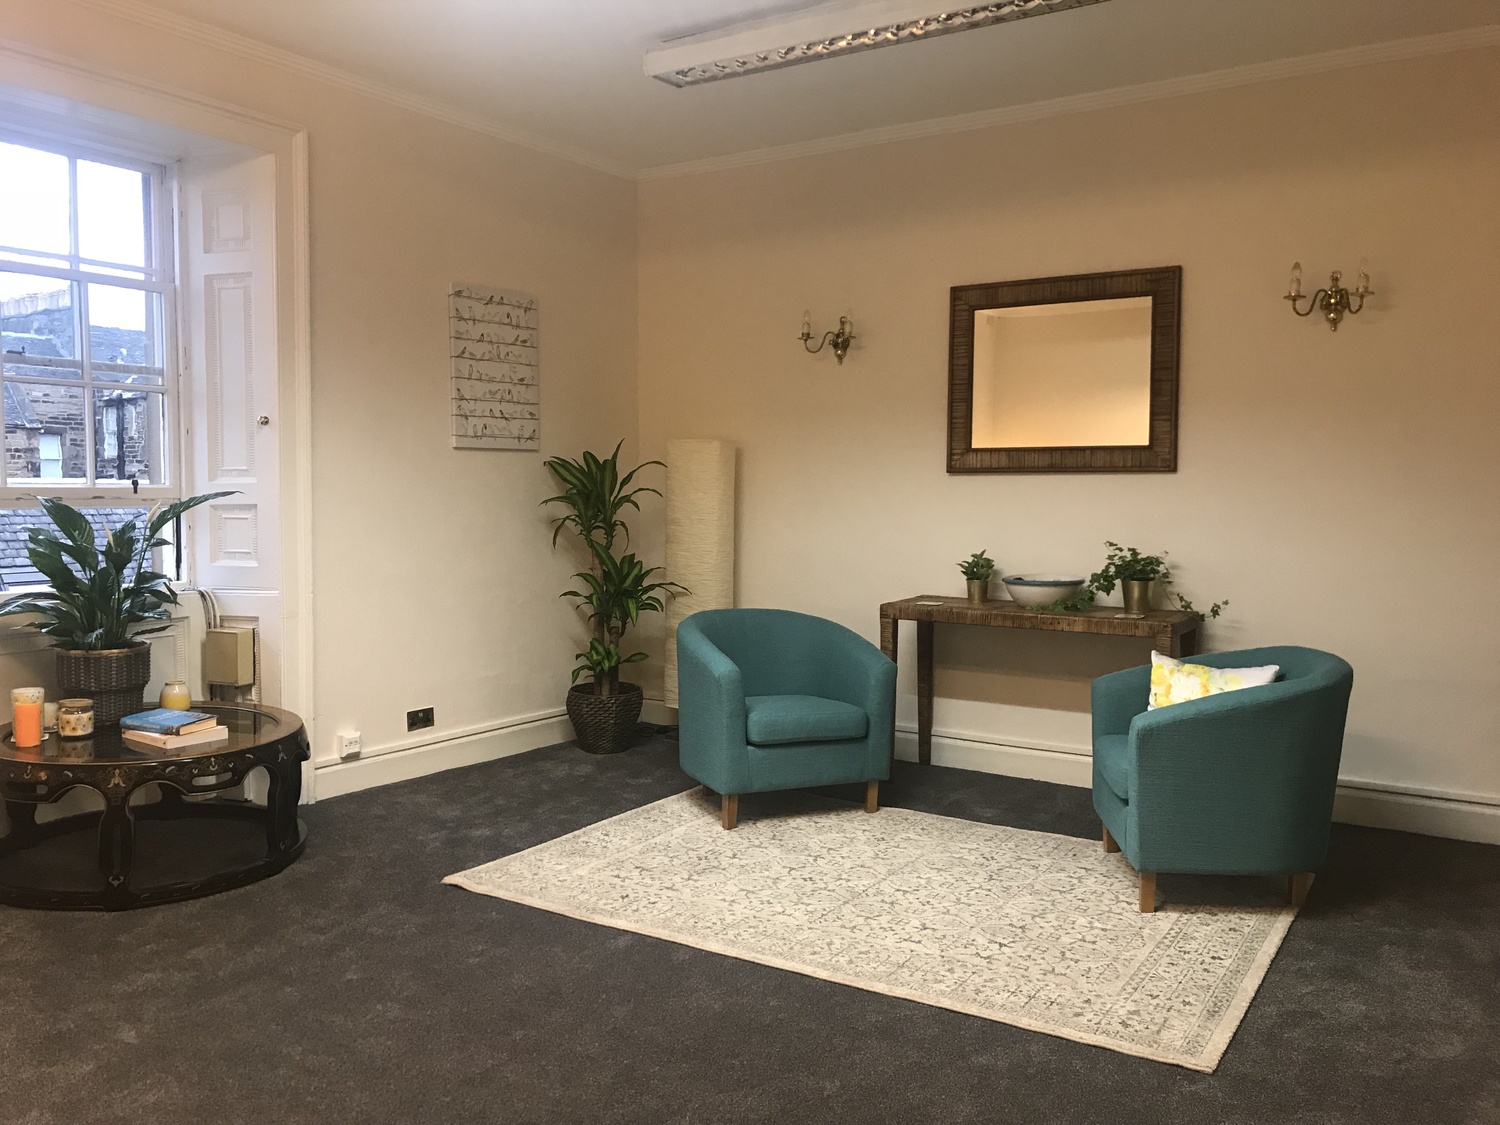 Gallery Photo of We provide a comfortable, non-judgemental and safe space for all our clients